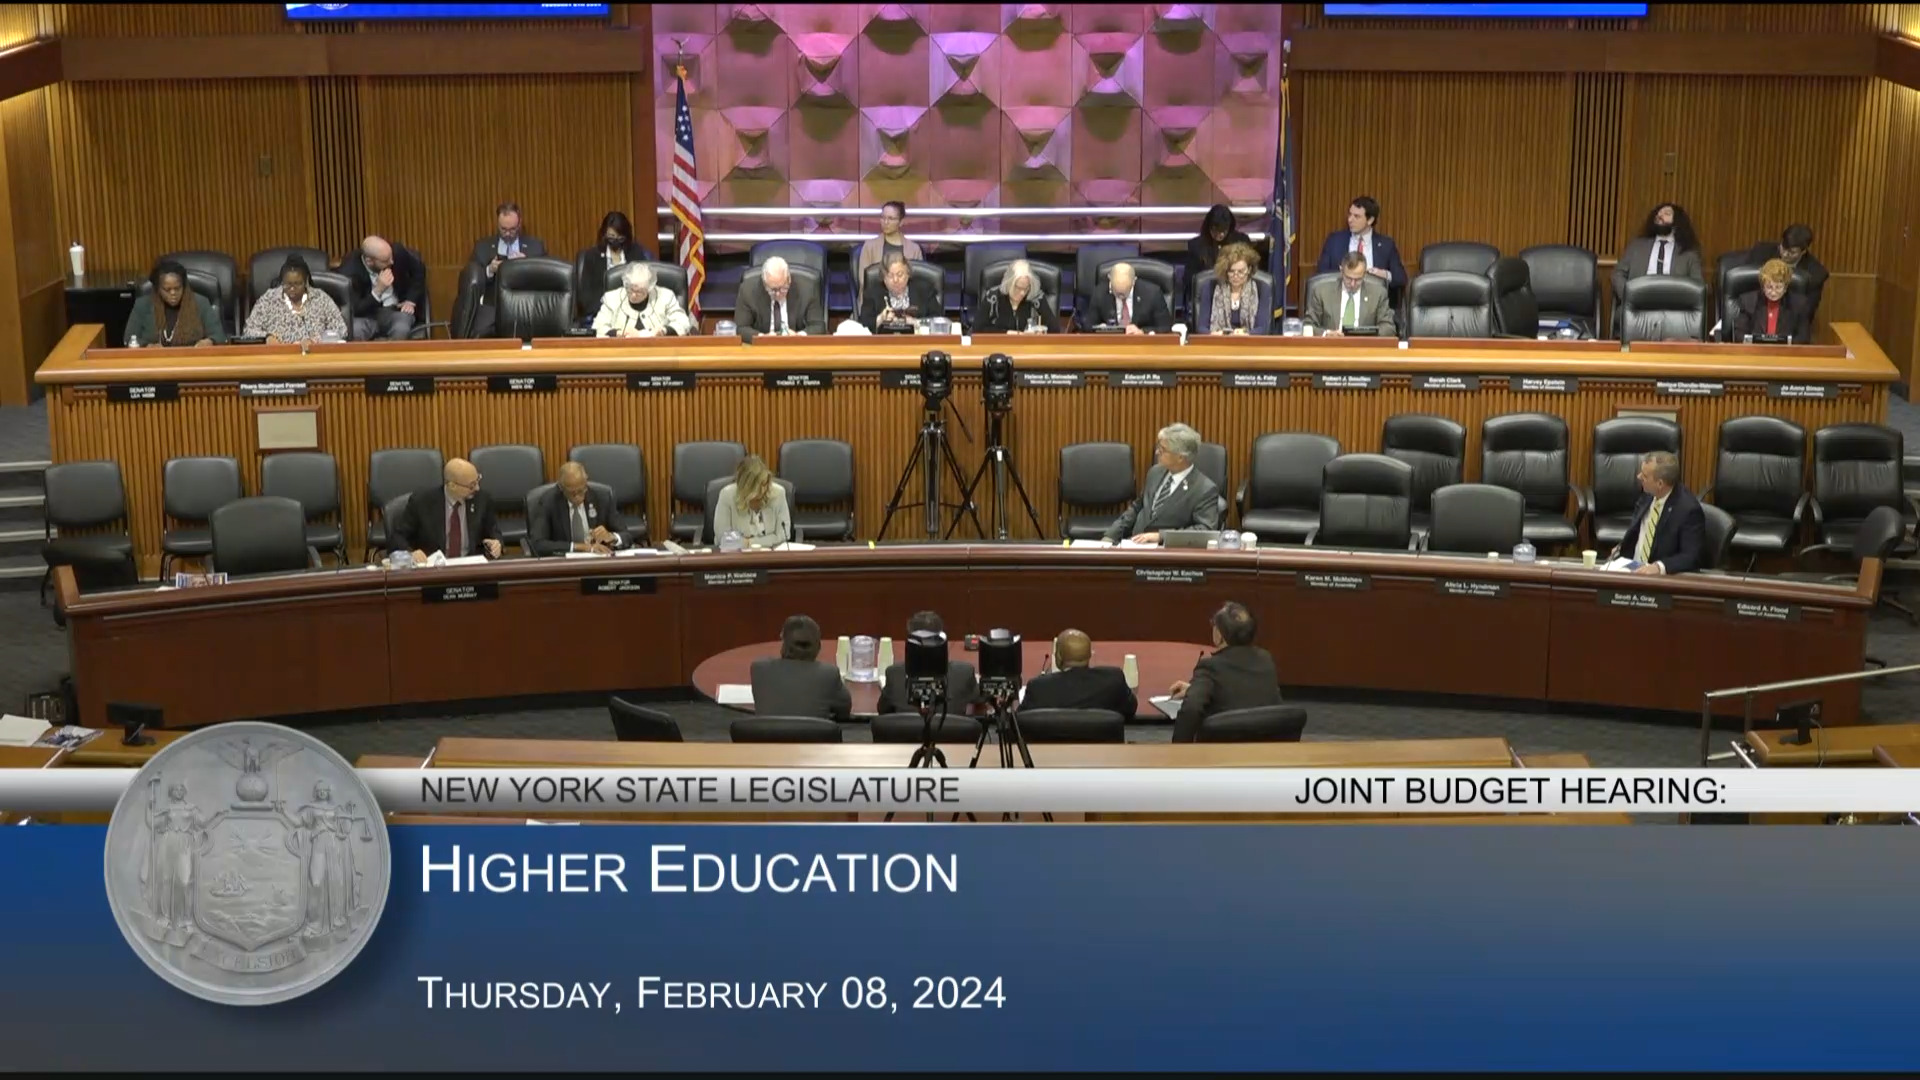 Union Officials Testify During Budget Hearing on Higher Education